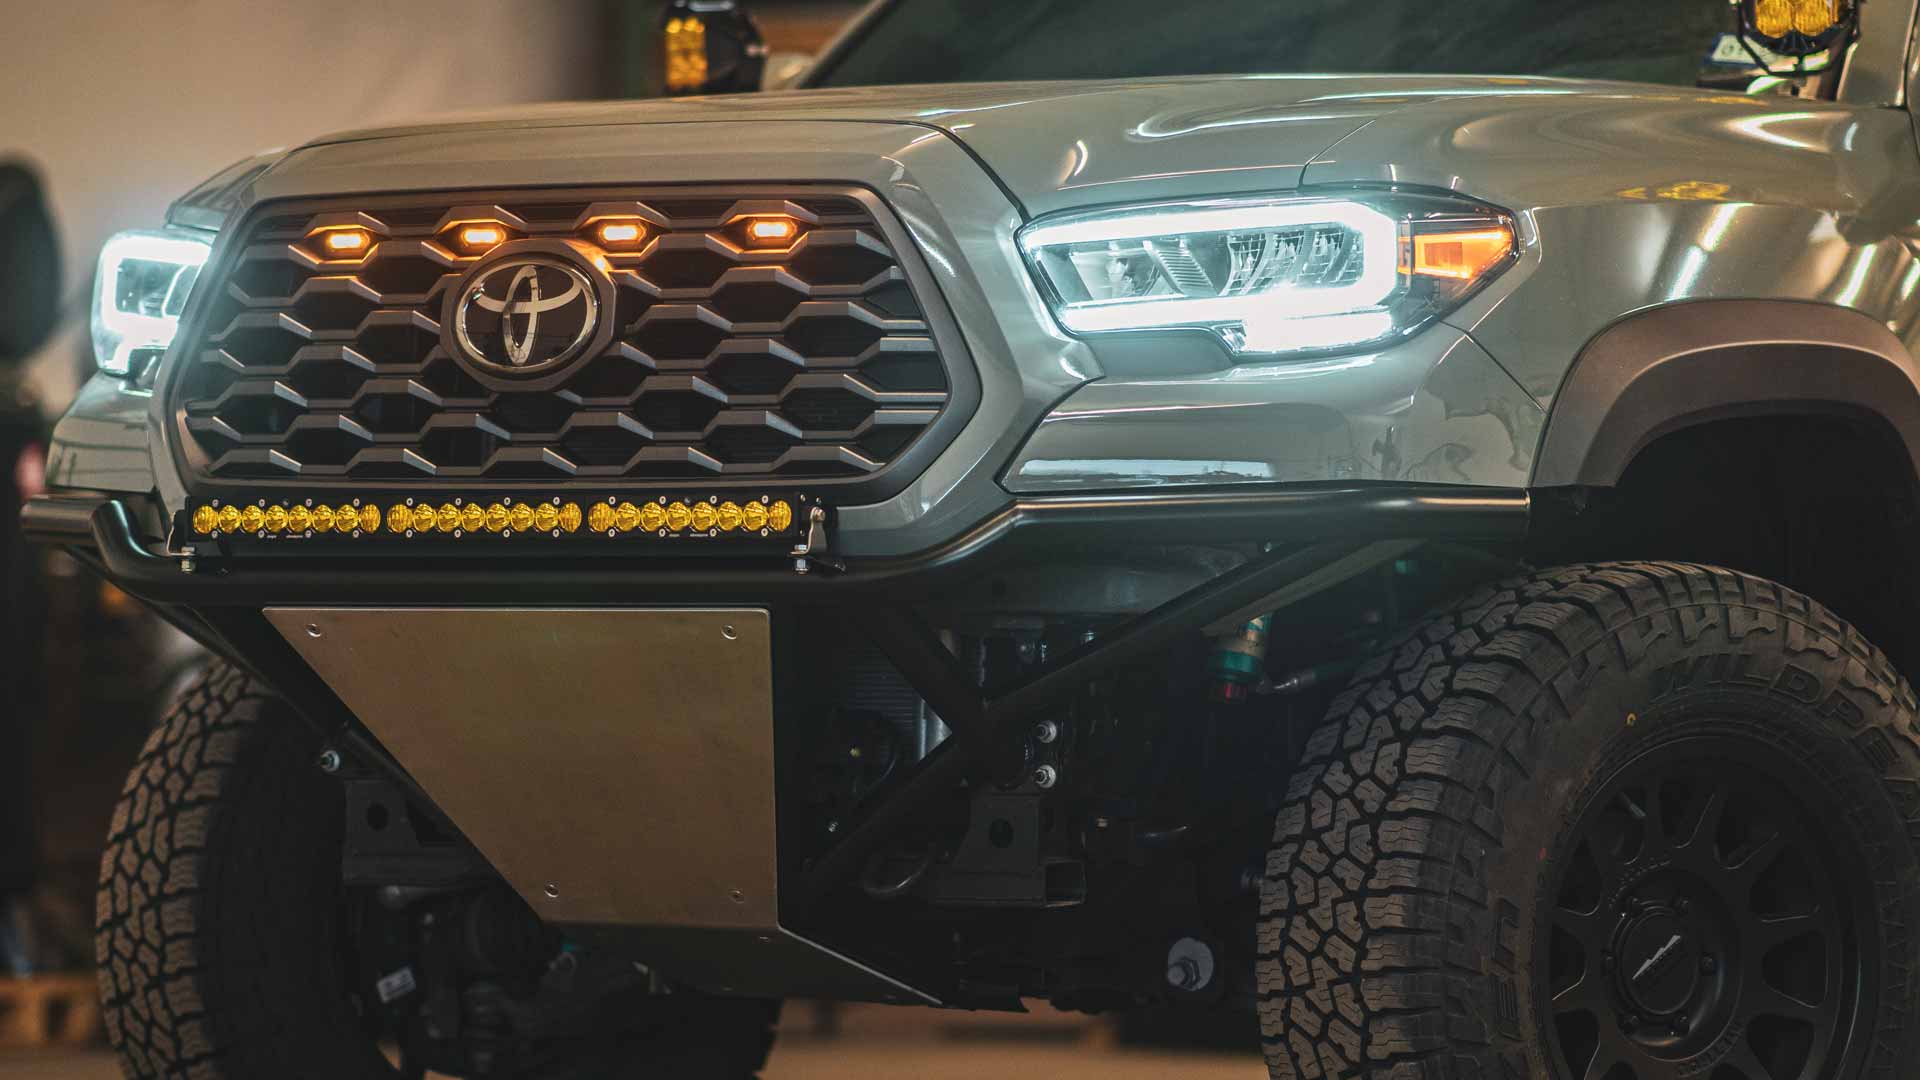 Kalil Fab Tacoma Bumper: The Lightest Front Bumper Option for your Toyota Tacoma